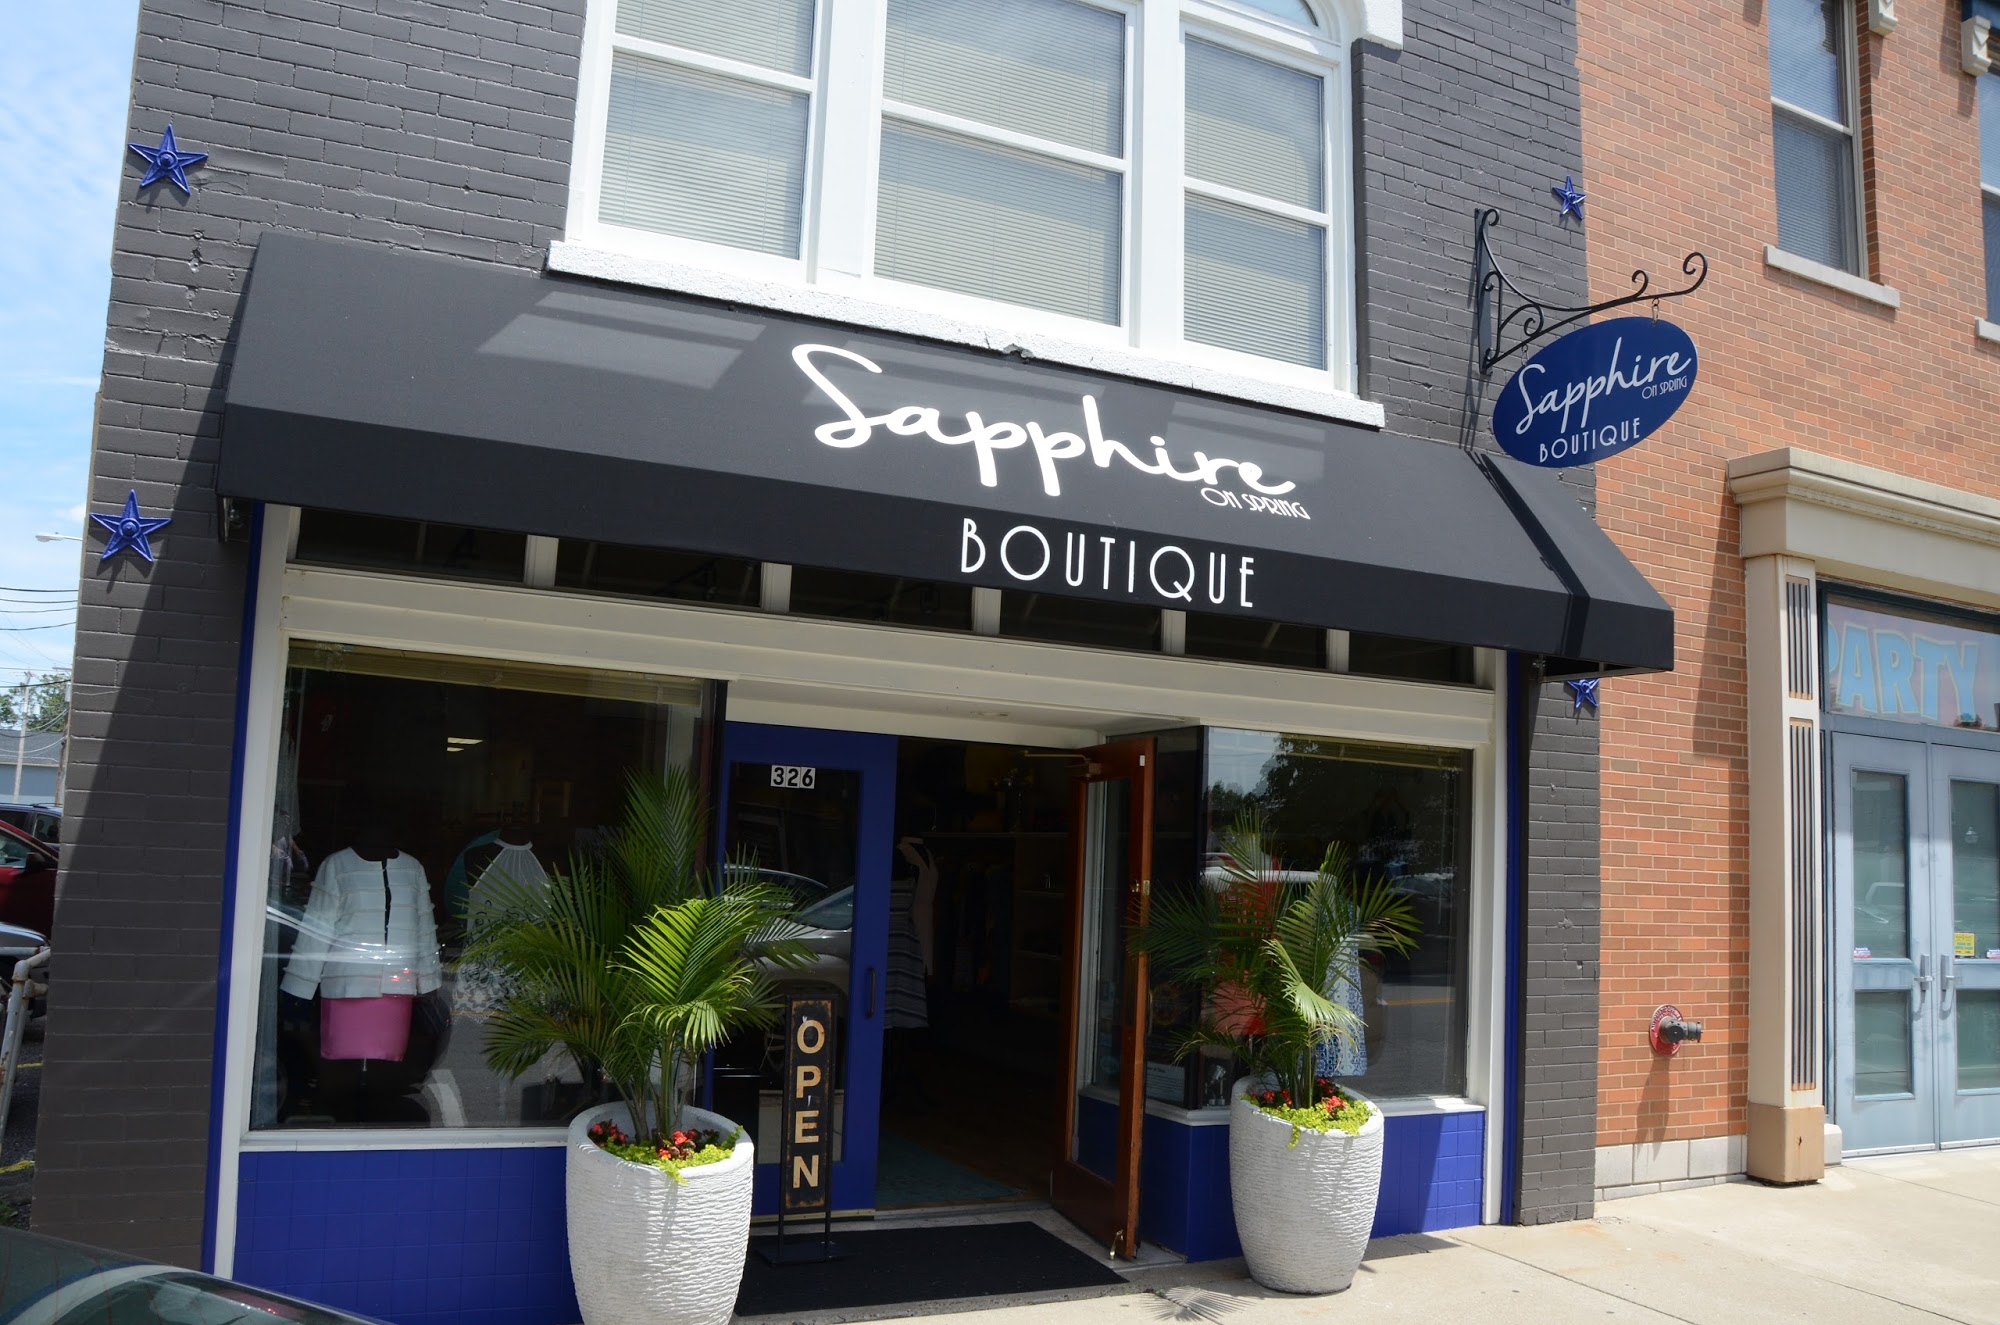 Sapphire on Spring Boutique